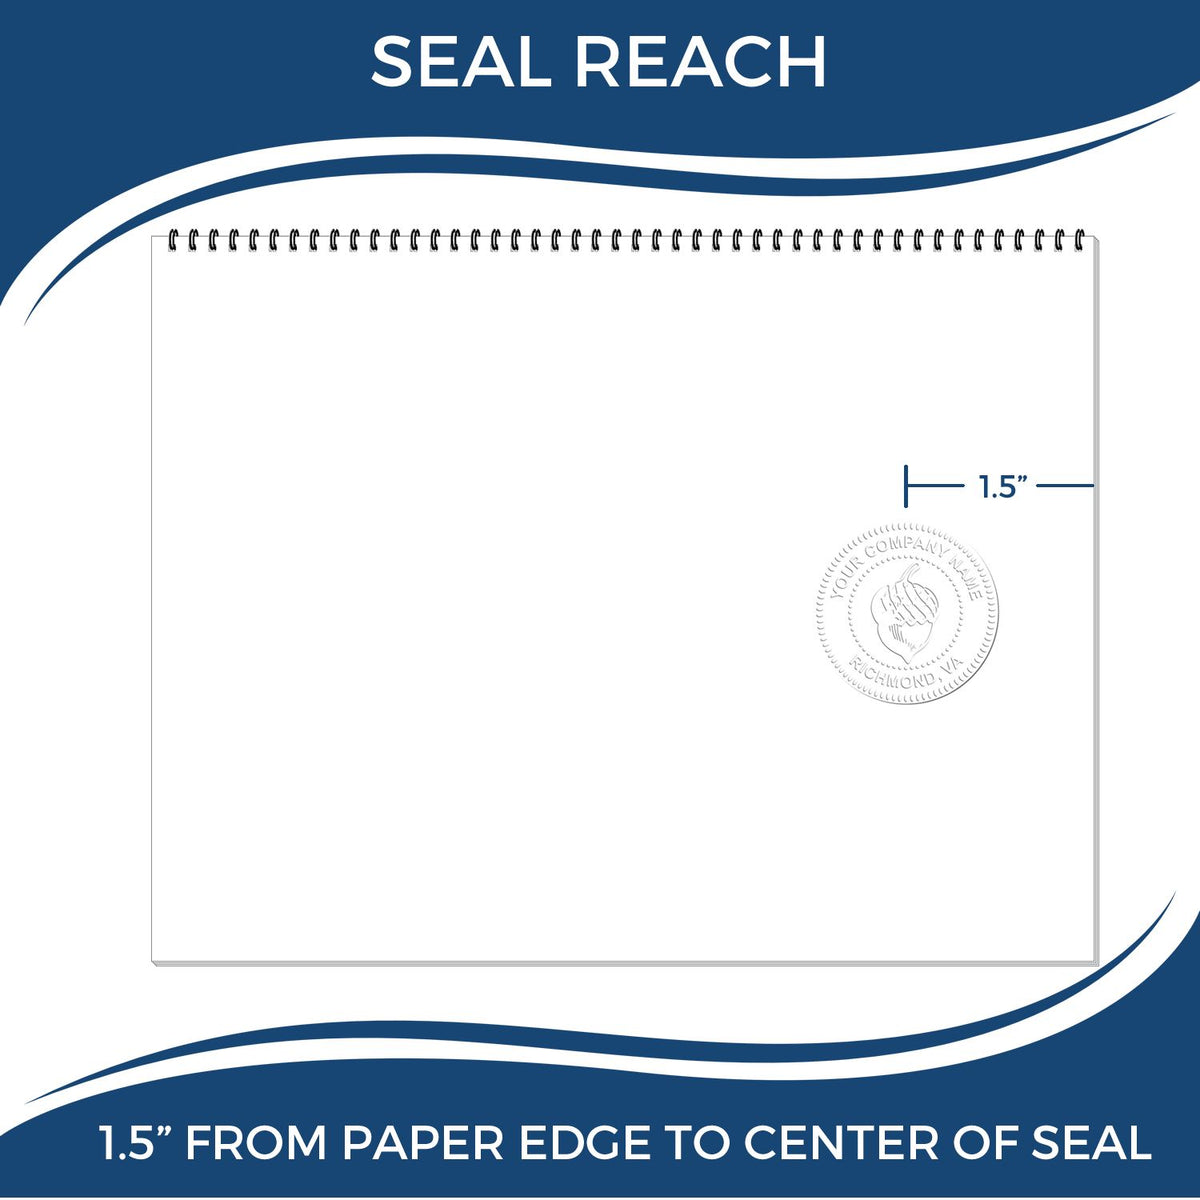 An infographic showing the seal reach which is represented by a ruler and a miniature seal image of the Gift Alabama Engineer Seal